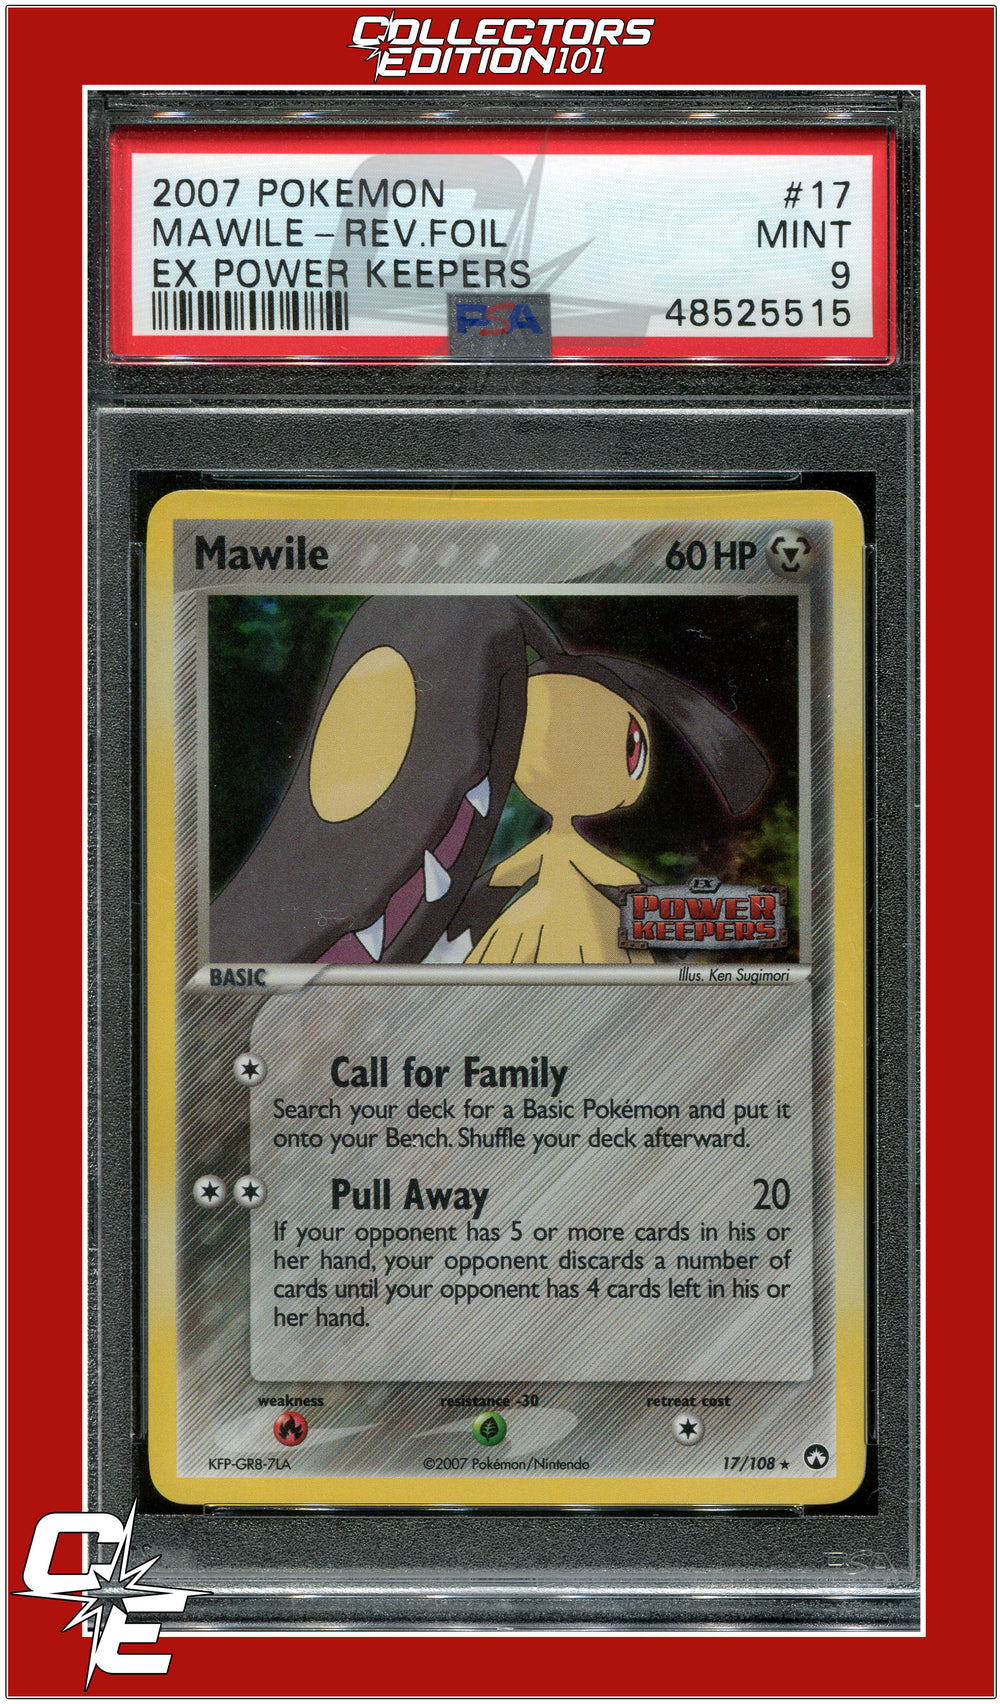 EX Power Keepers 17 Mawile Reverse Foil PSA 9